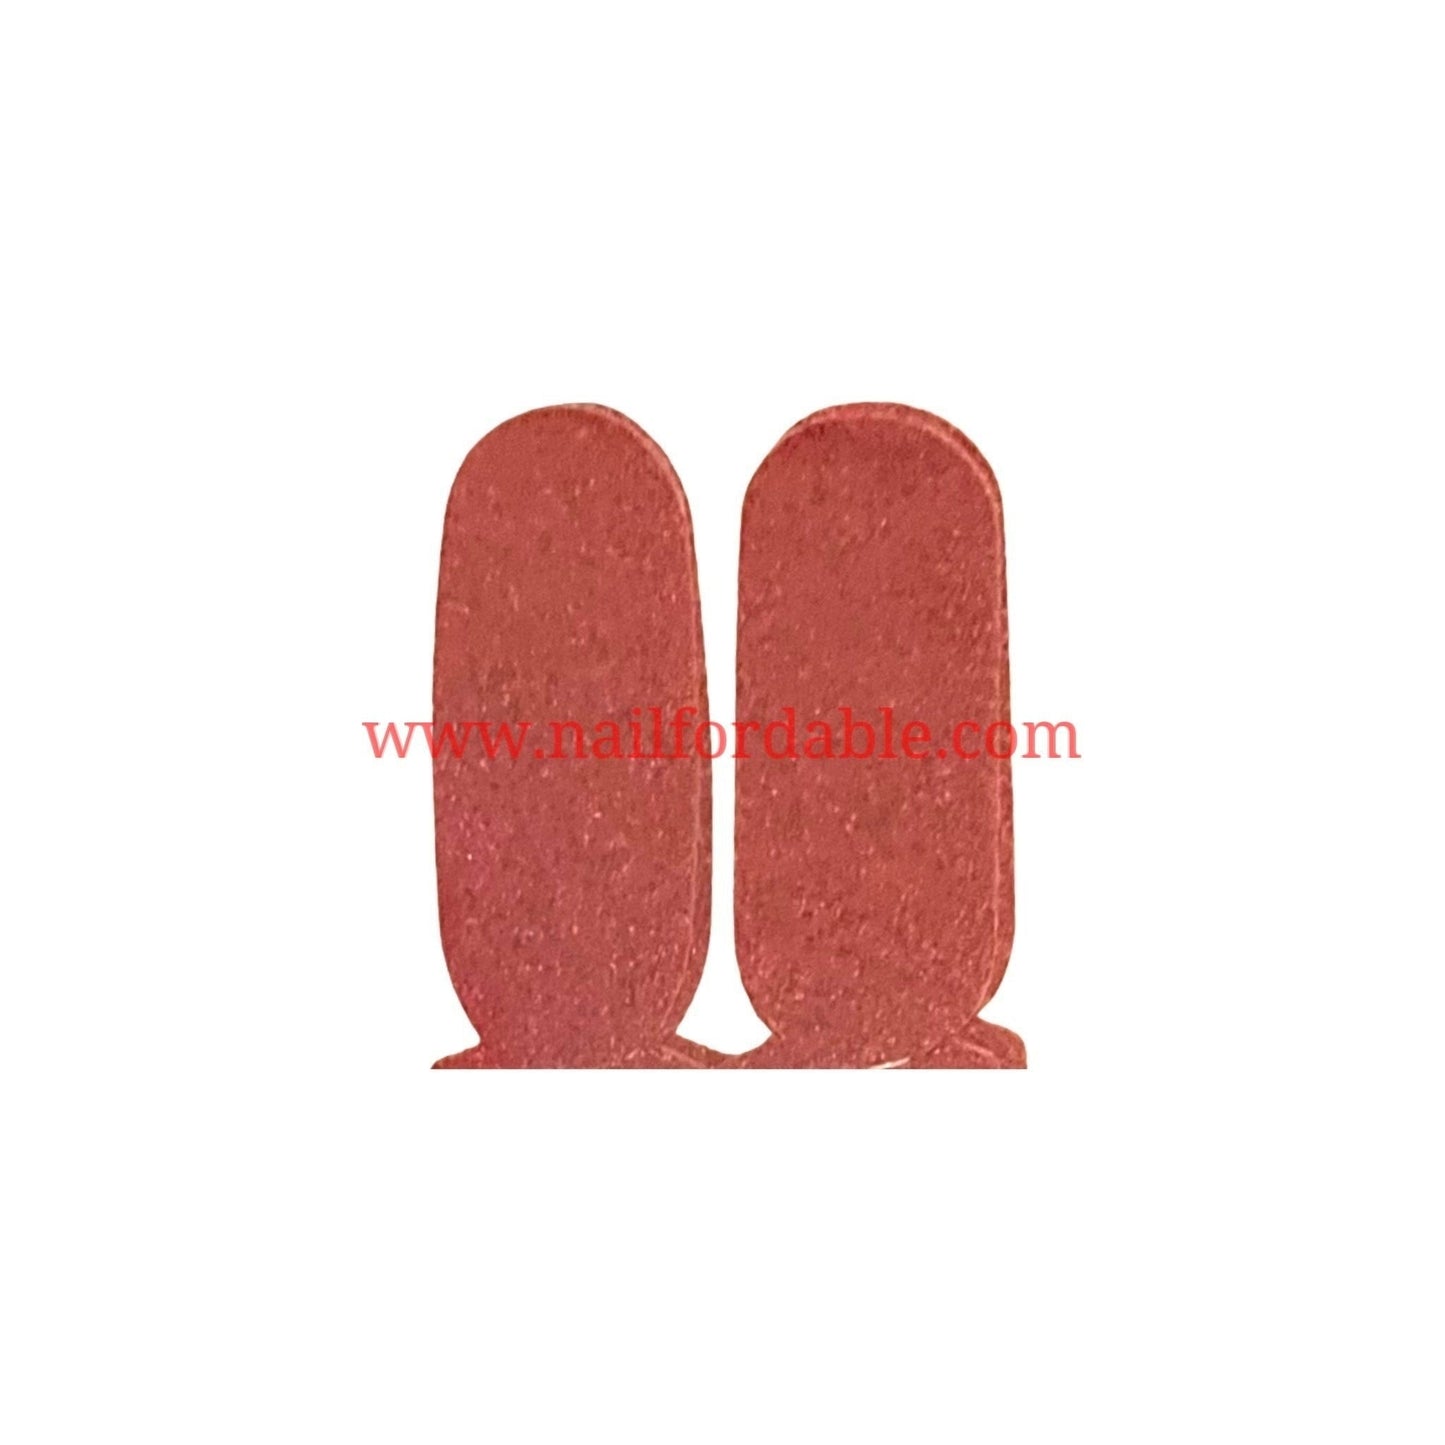 Red glitter Accents Nail Wraps | Semi Cured Gel Wraps | Gel Nail Wraps |Nail Polish | Nail Stickers